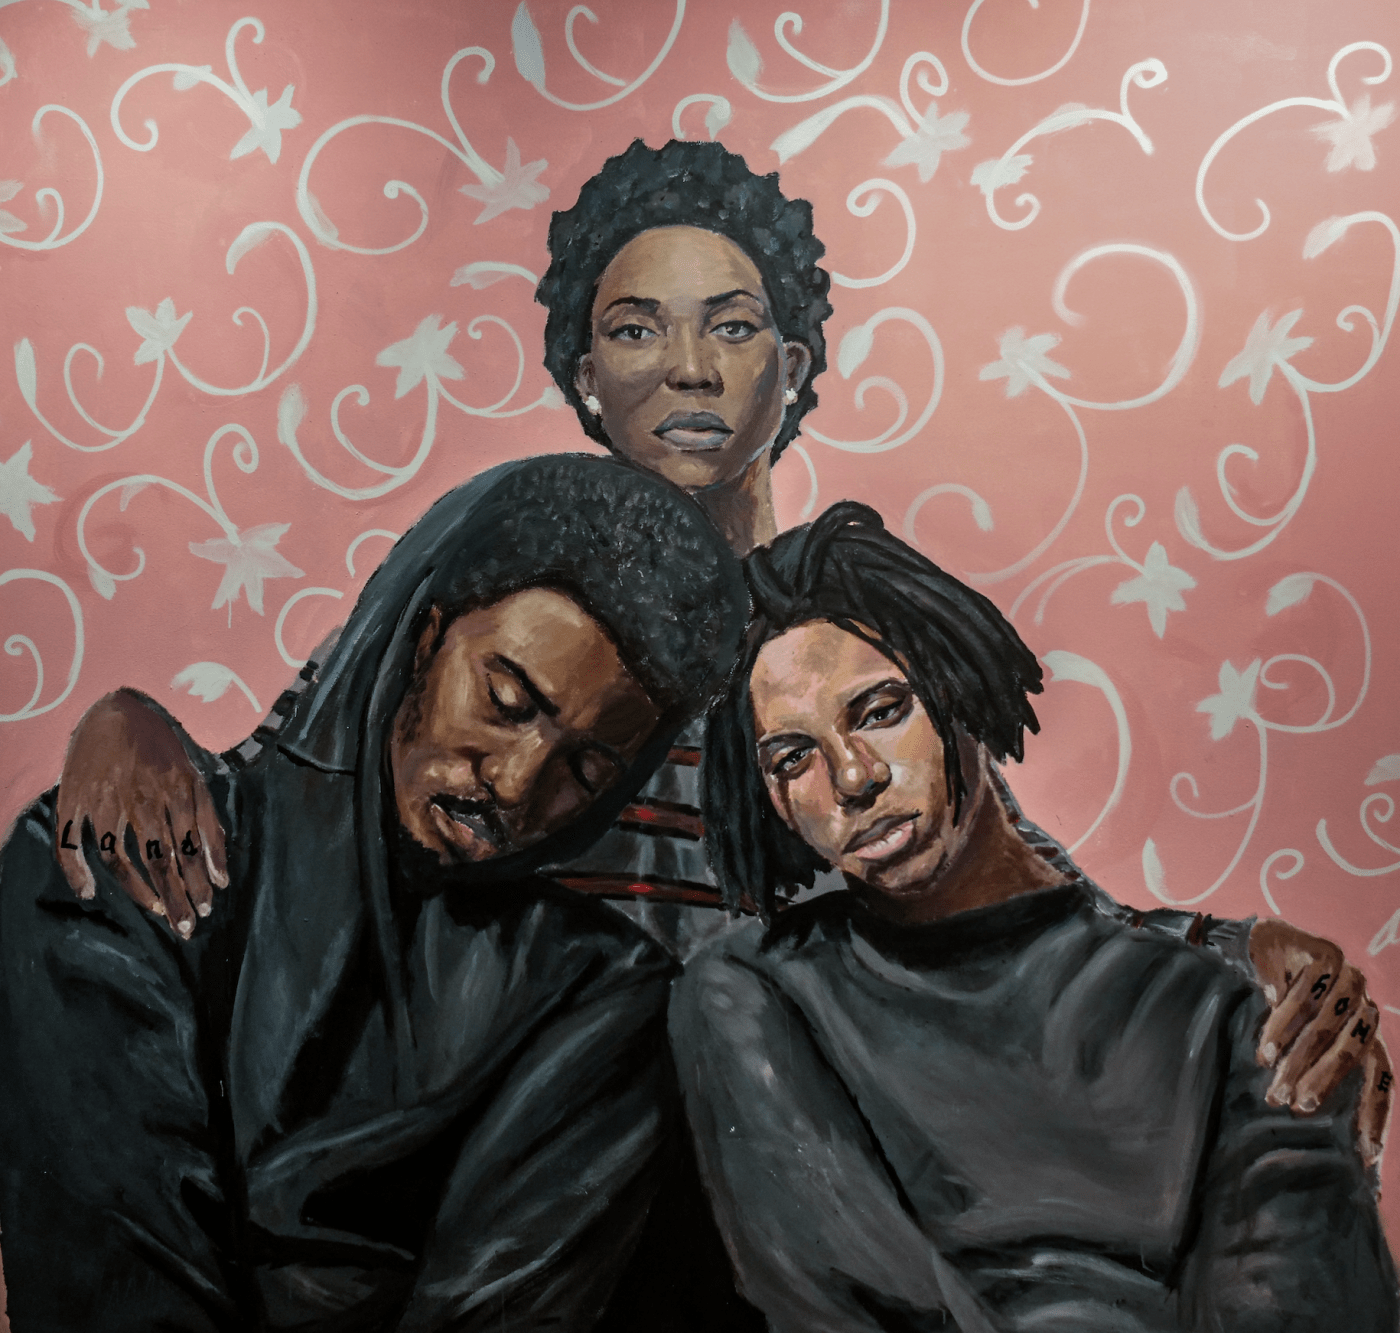 Painting of three black folks leaning against each other, in front of a floral pink and white background.